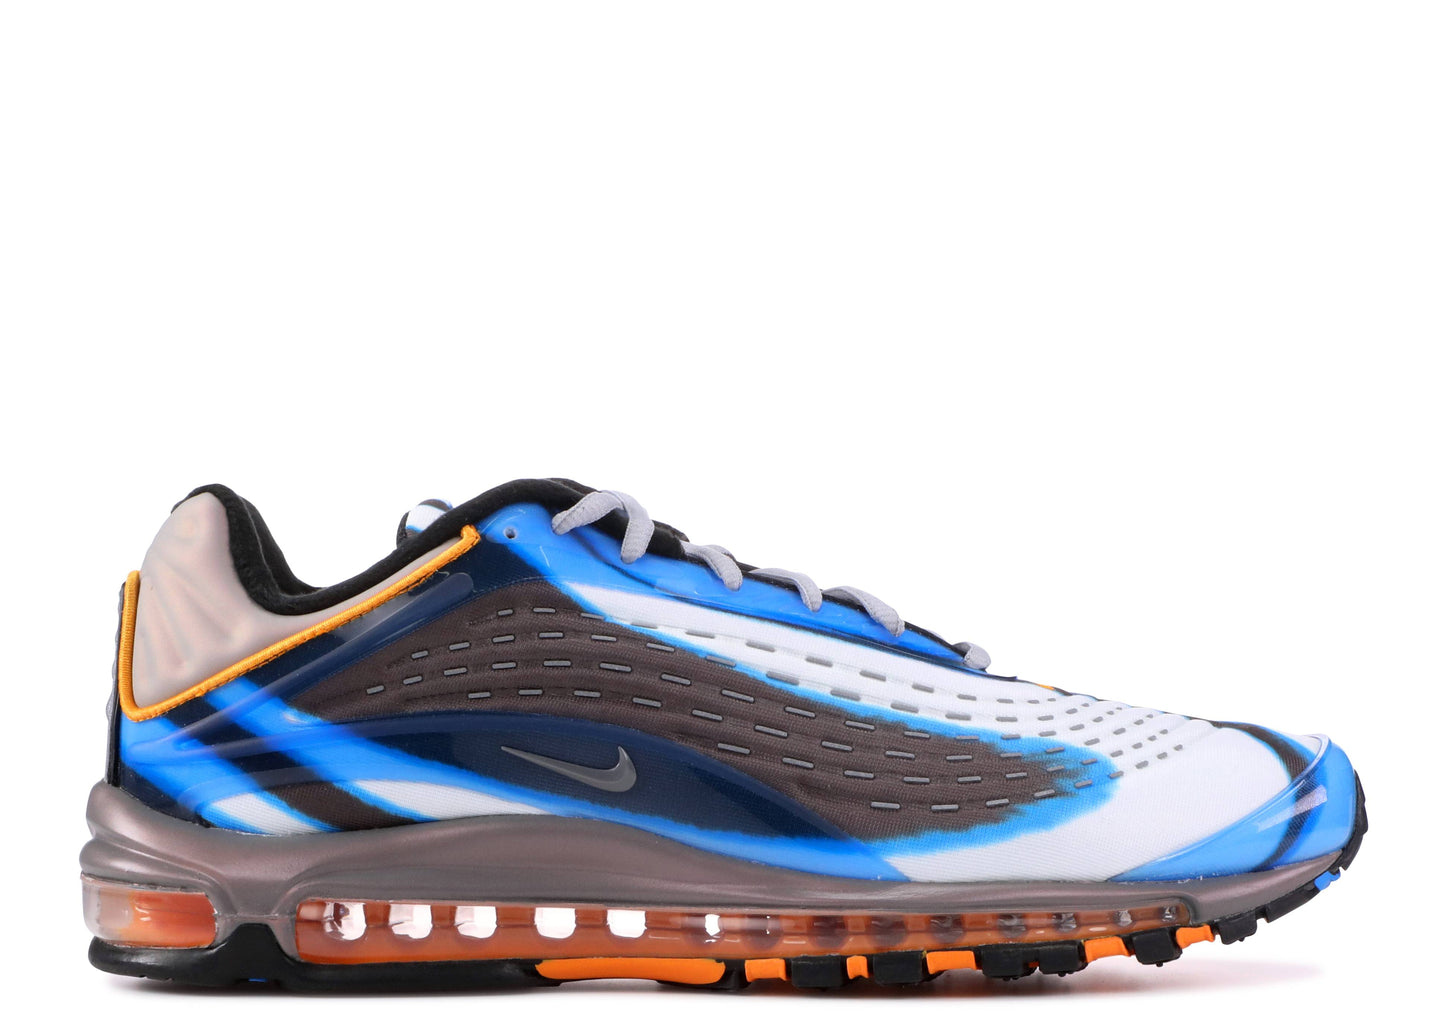 Nike Air Max Deluxe "Photo Blue"